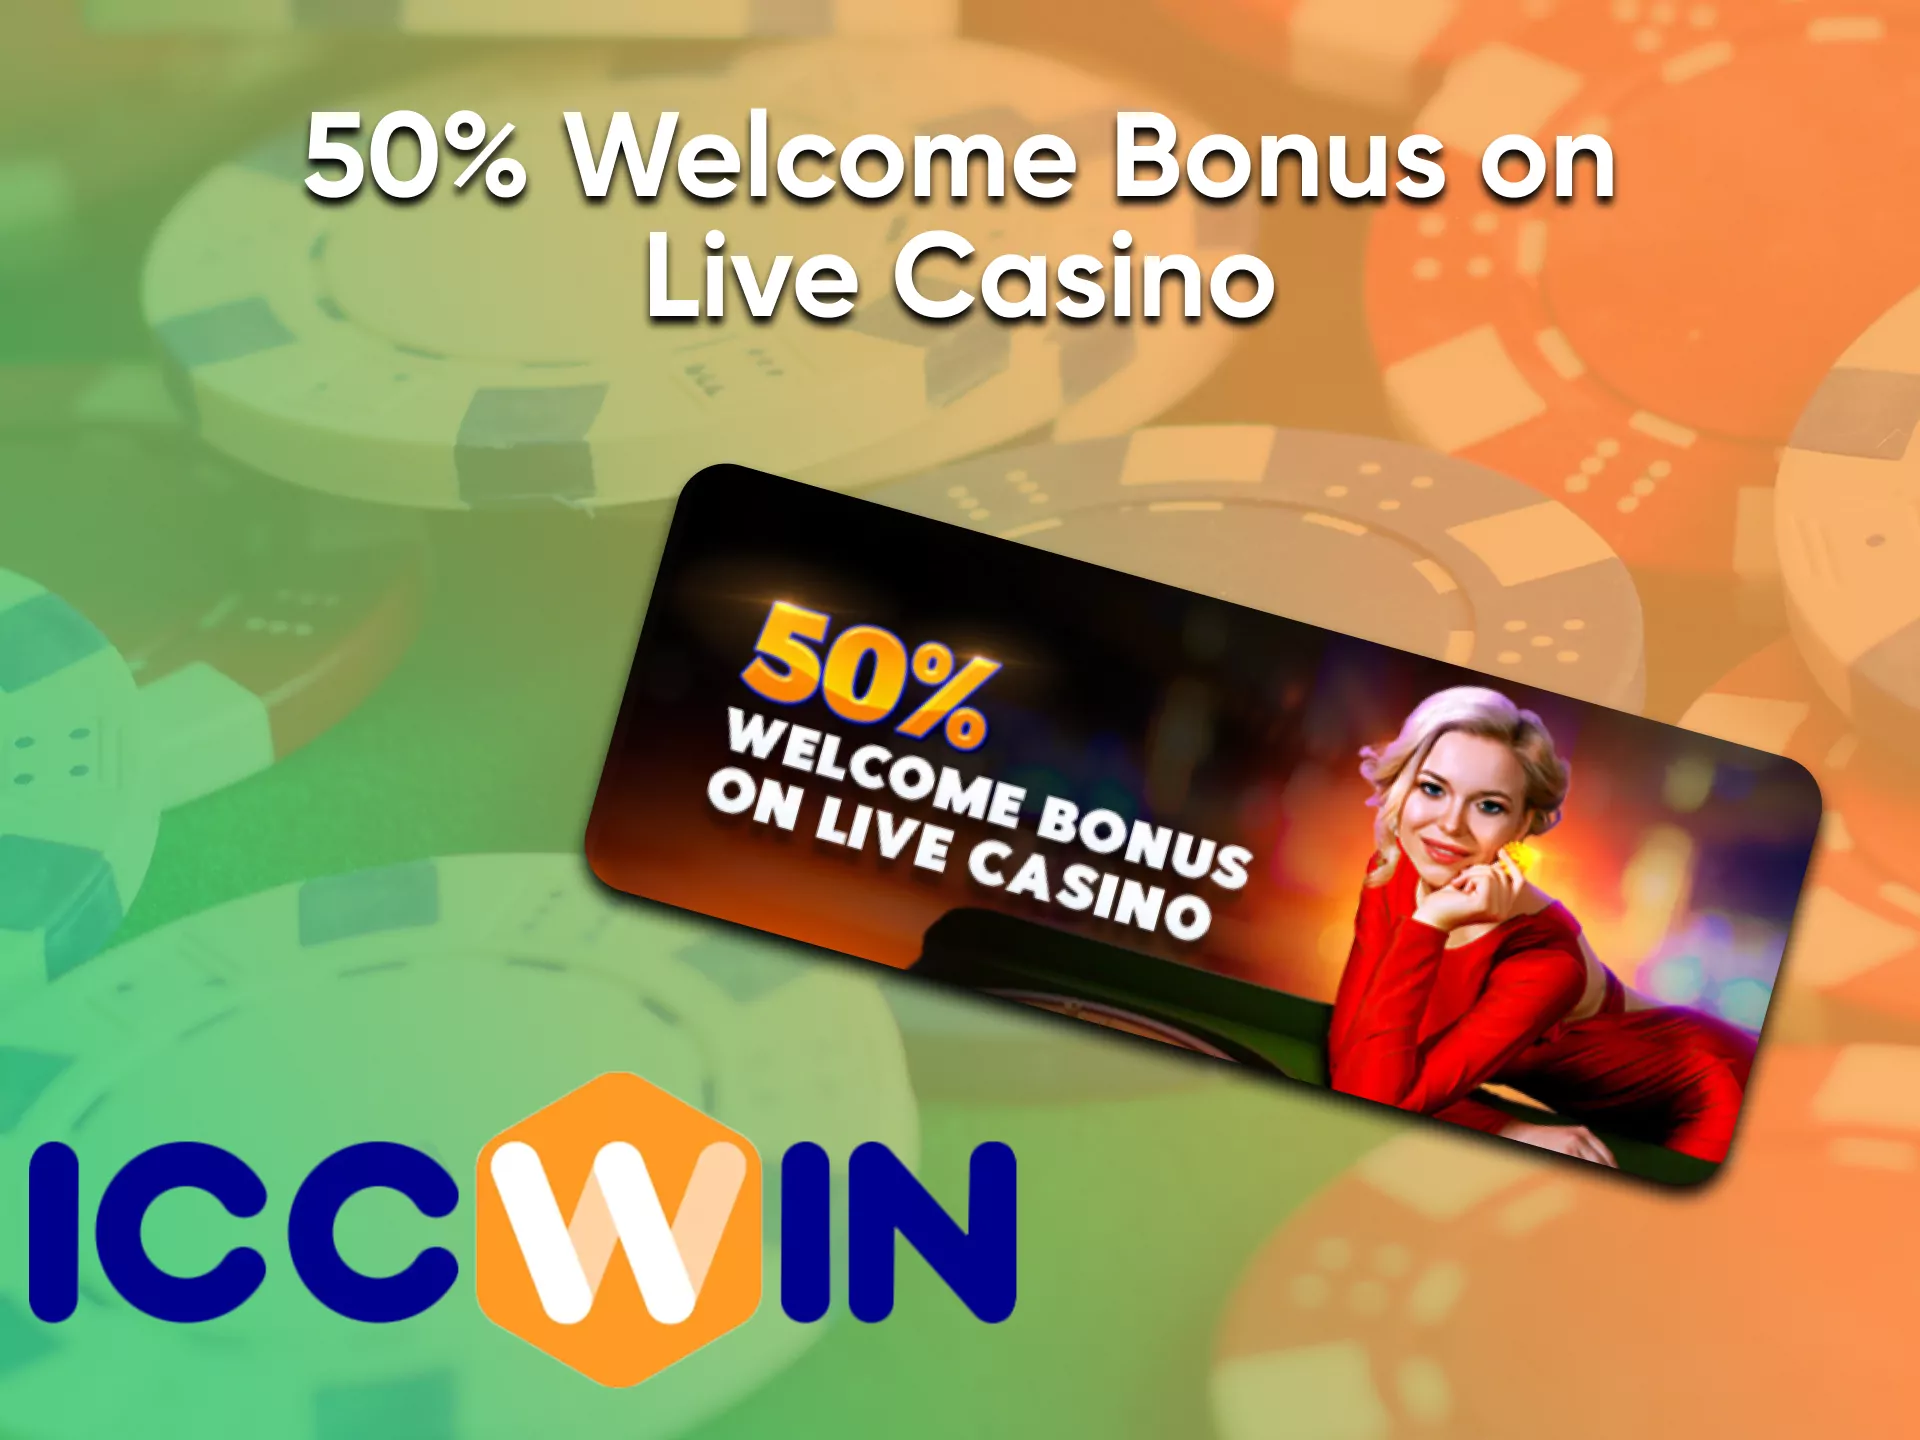 Replenish your account to receive a bonus from ICCWin.